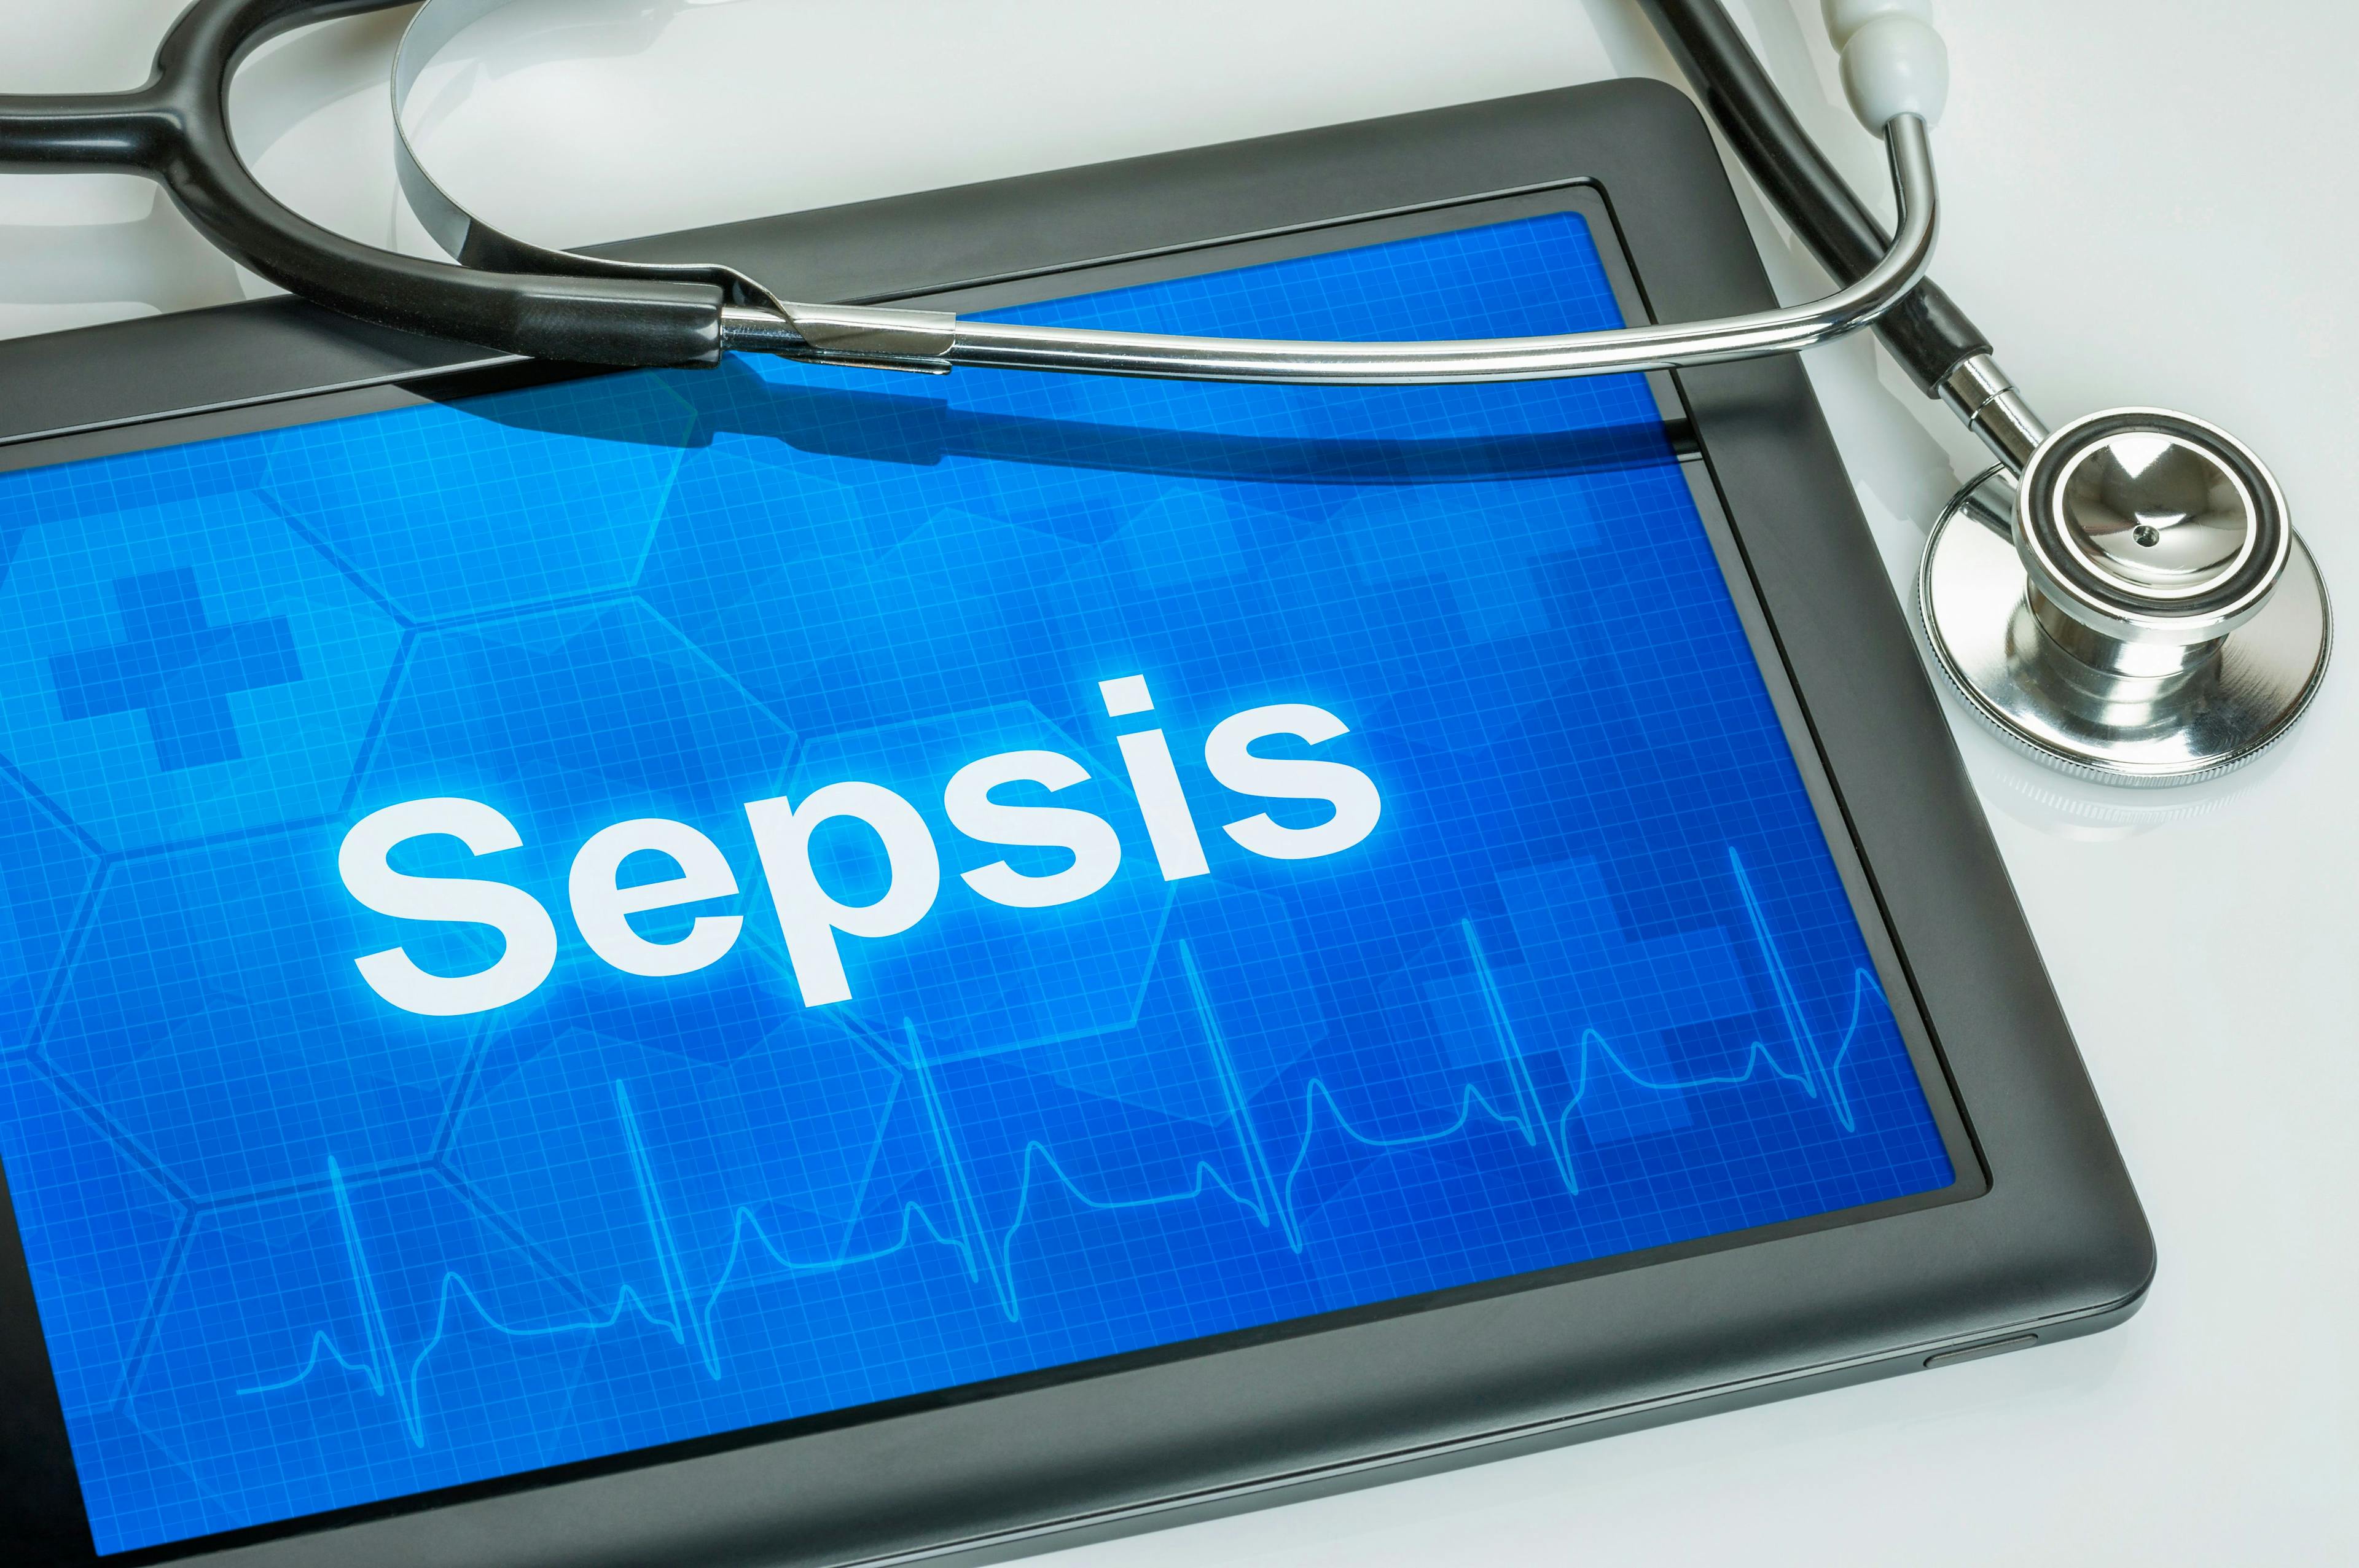 tablet that says sepsis